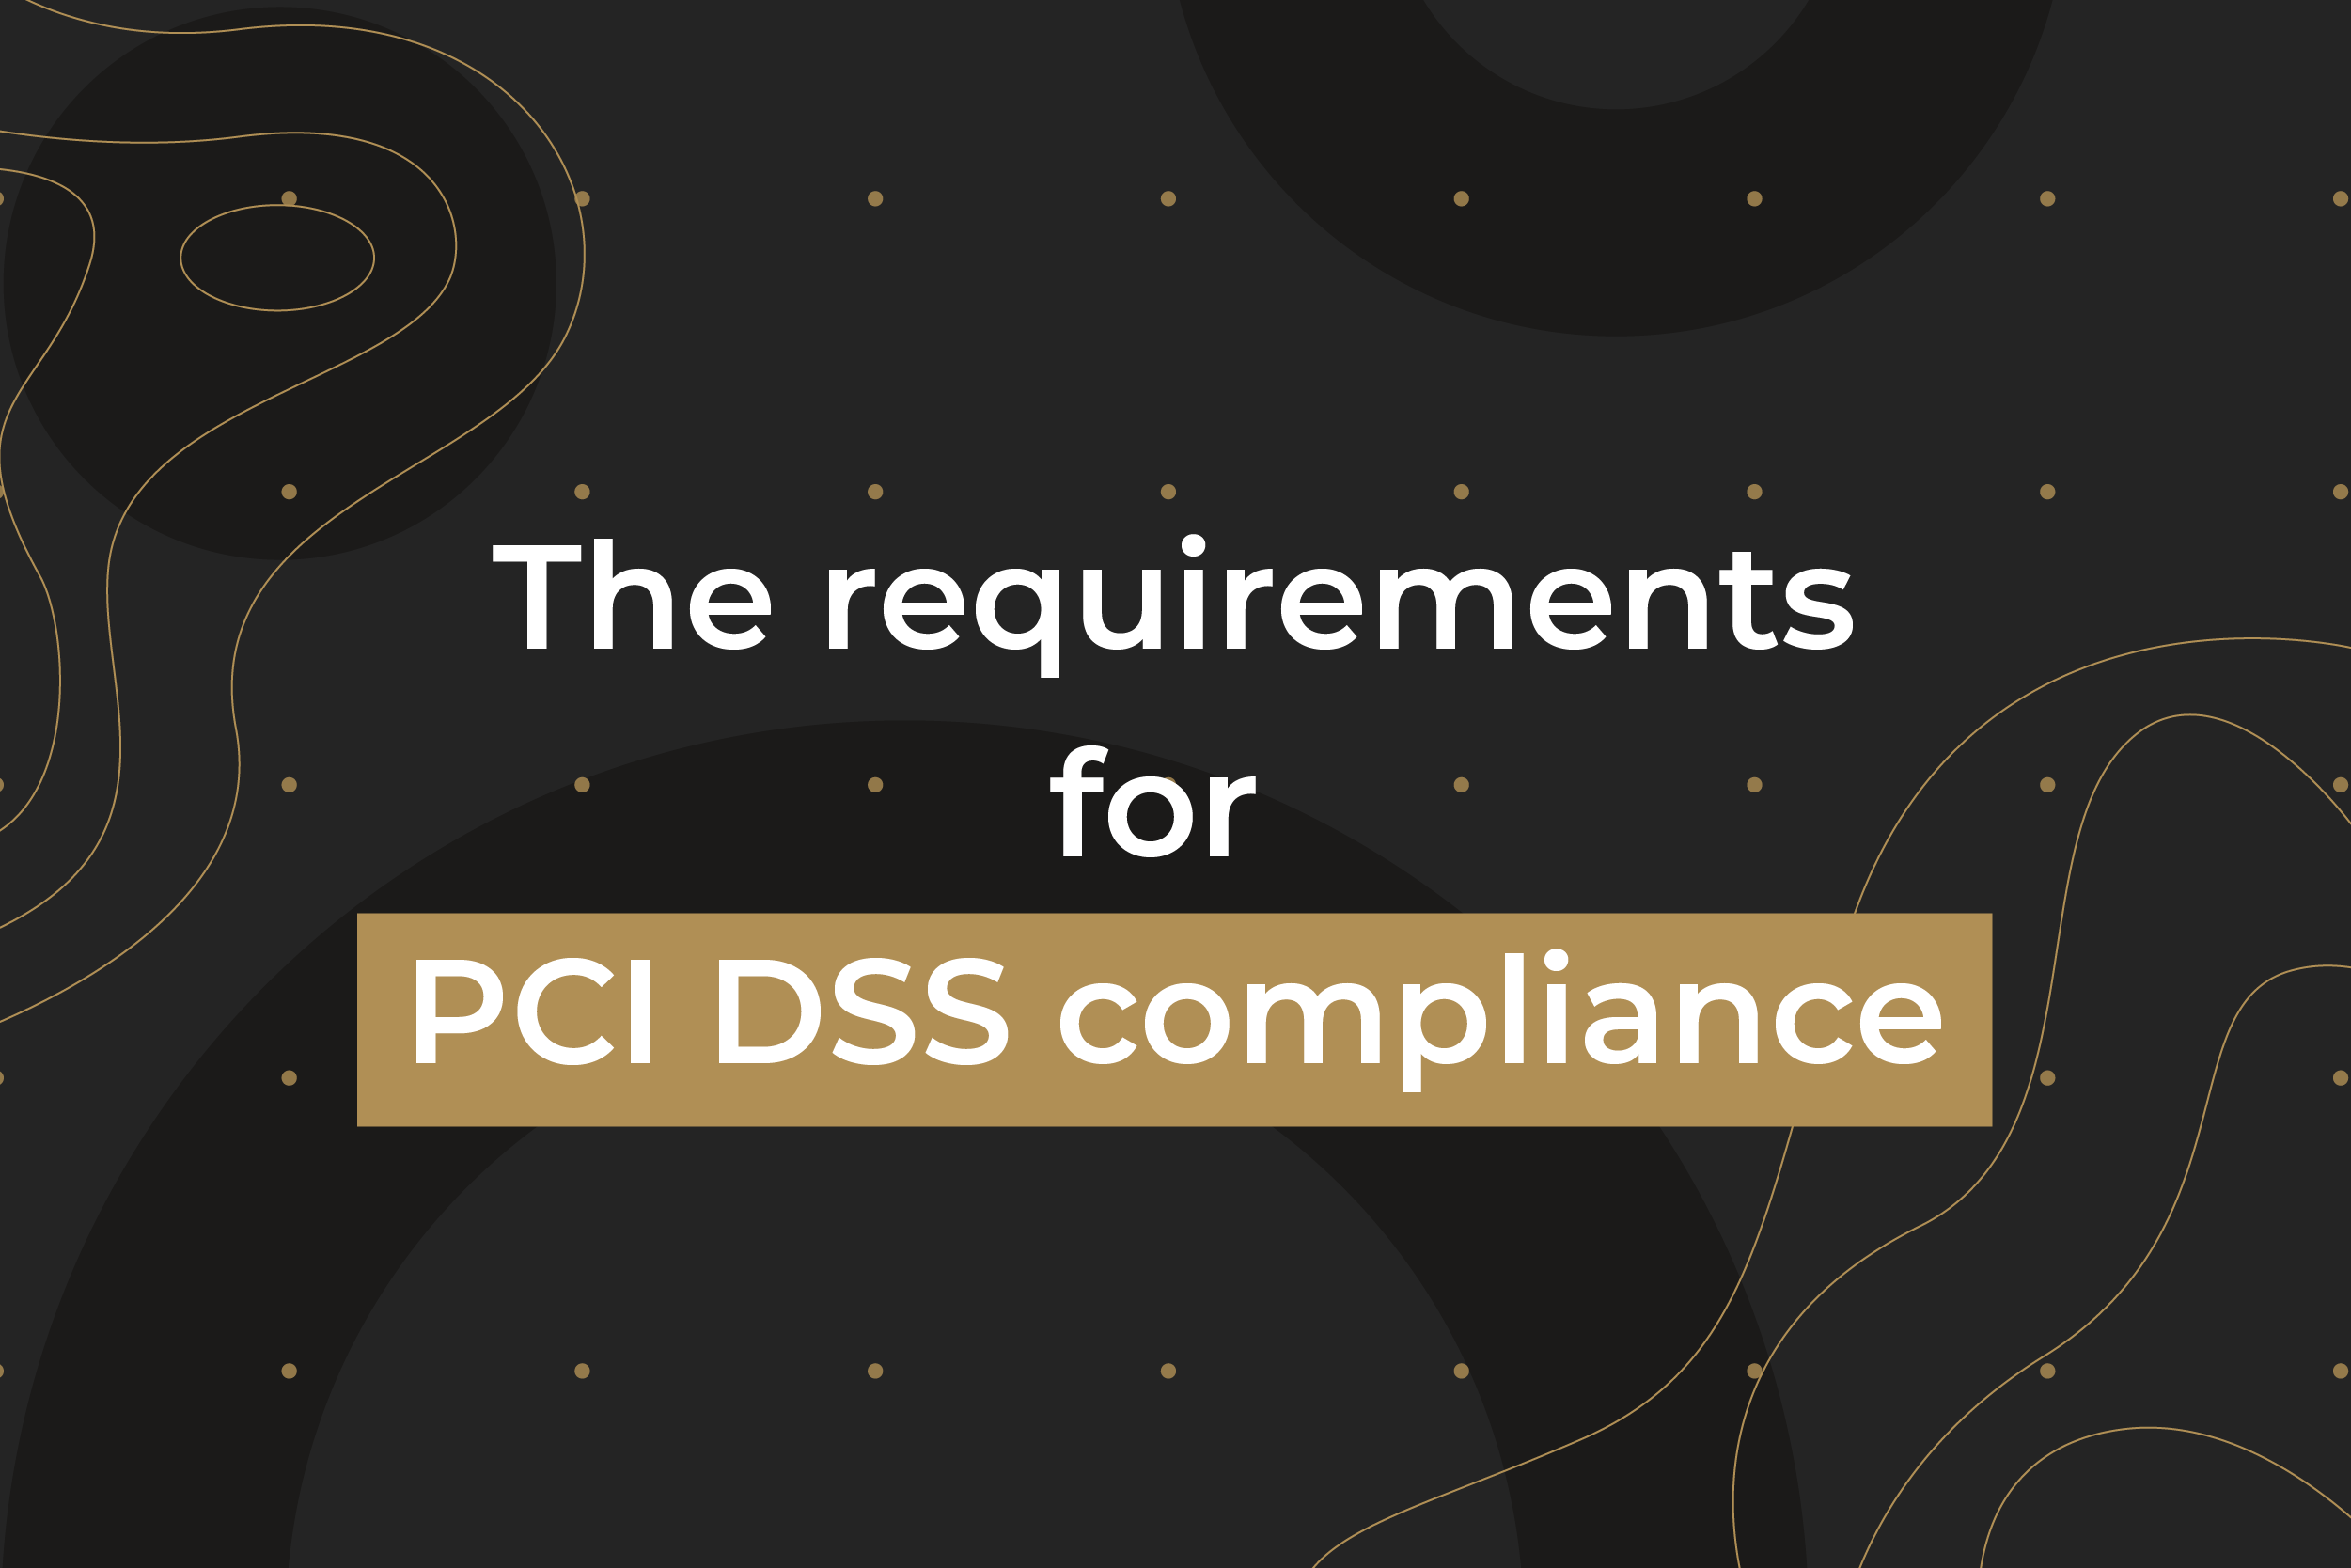 The requirements for PCI DSS compliance